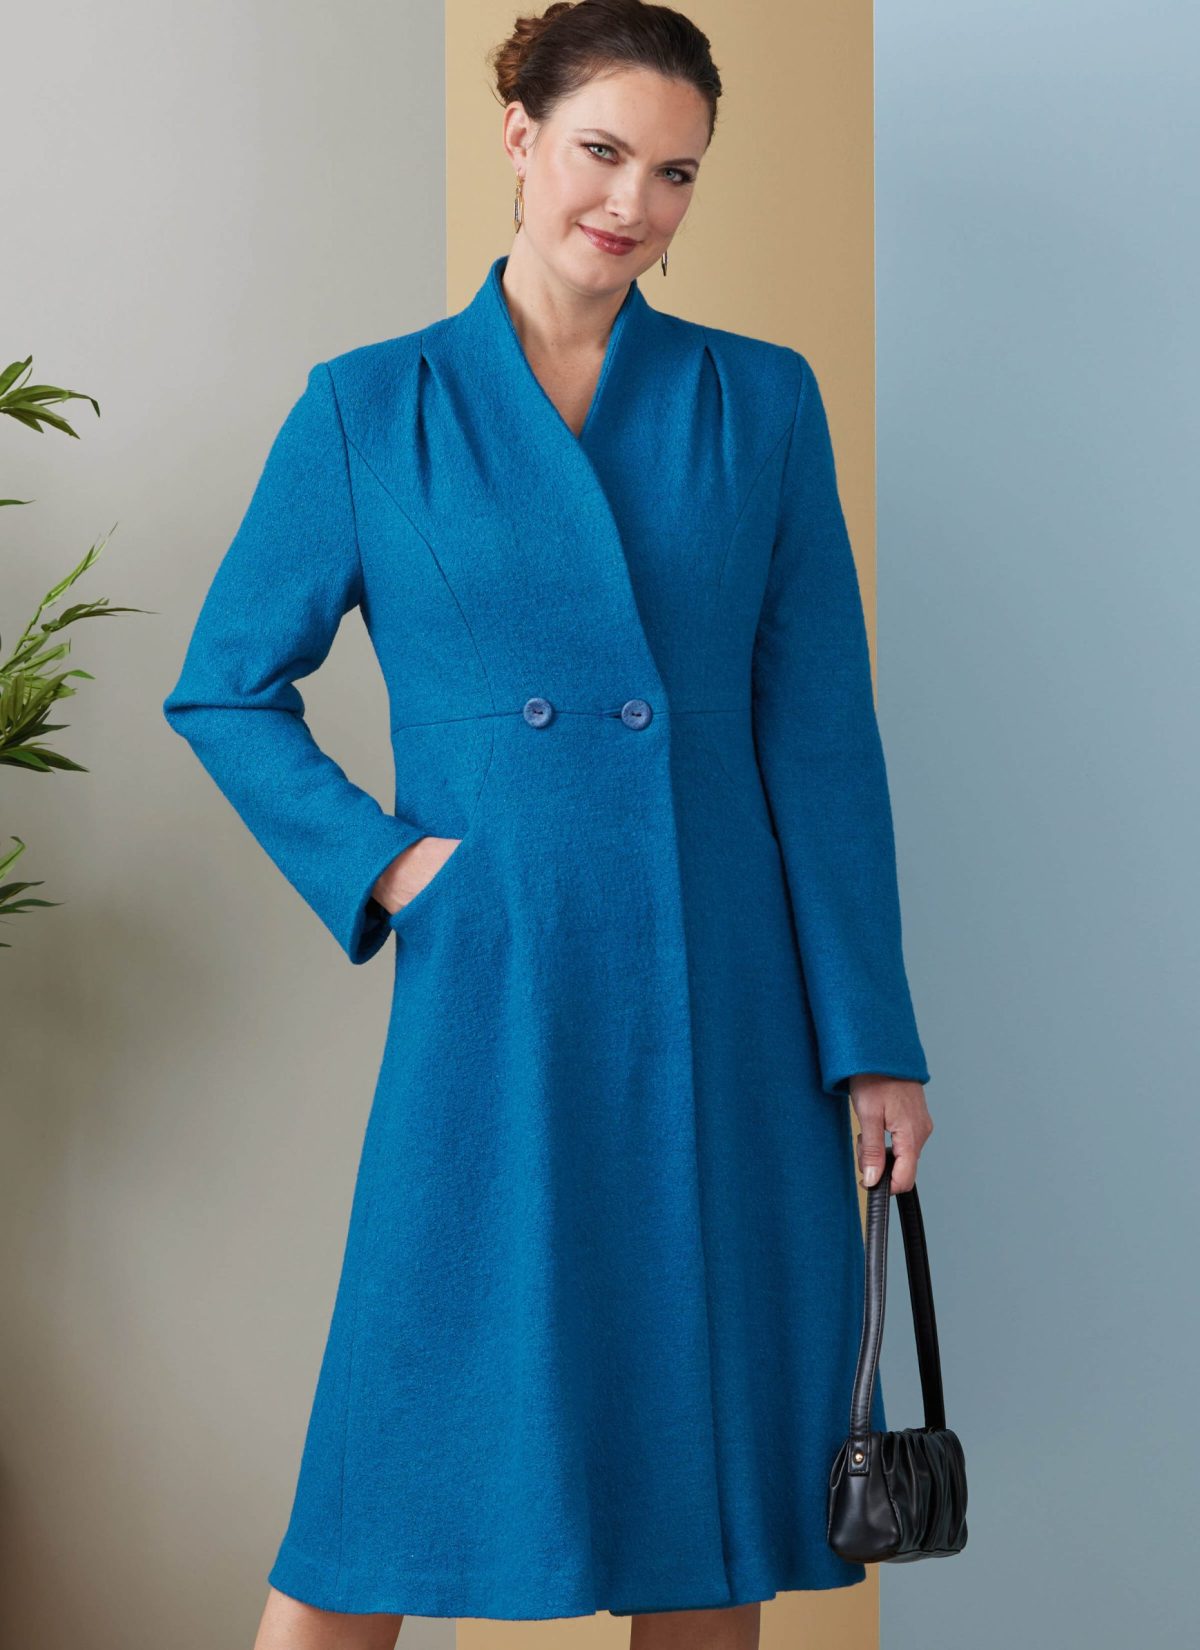 Butterick Sewing Pattern B6917 Misses' Coat